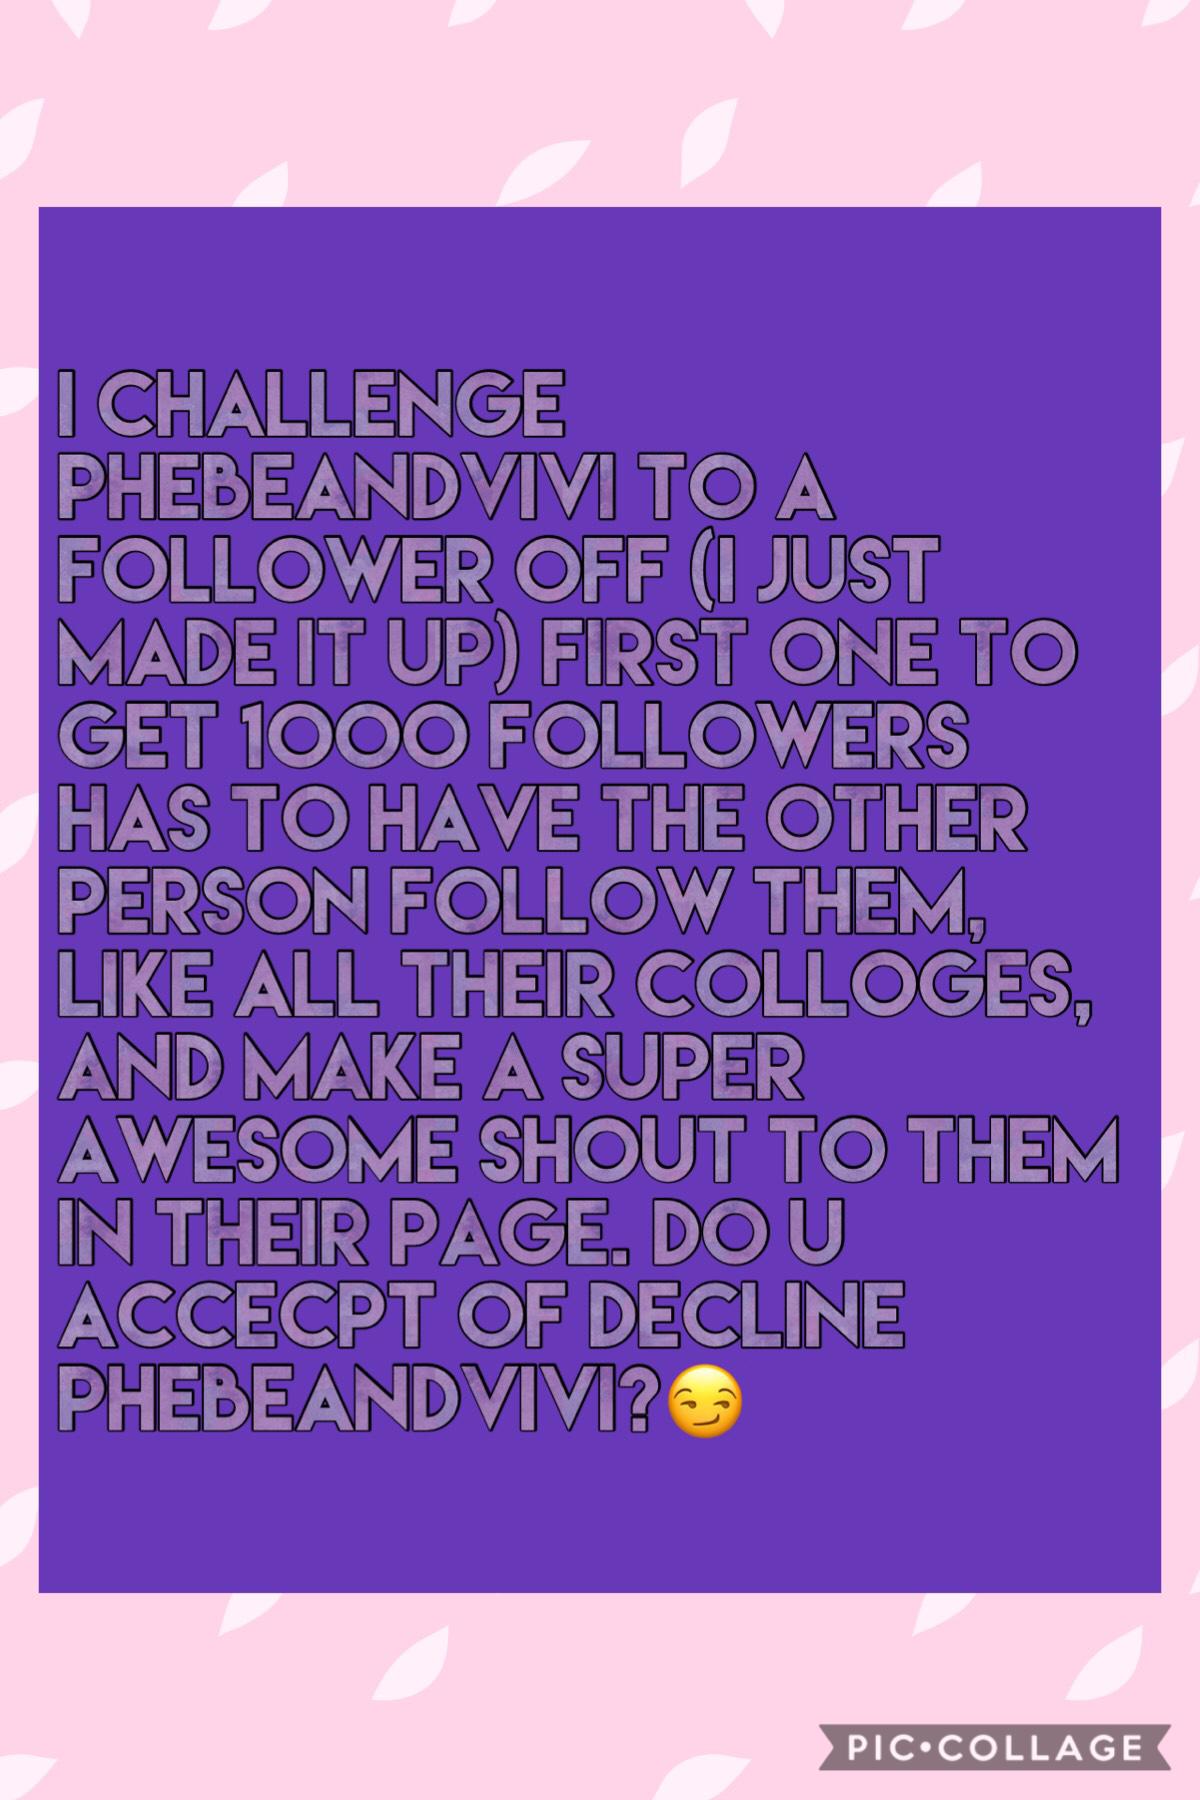 So pls follow me. If u follow me for the challenge then i will follow u back.😜😁